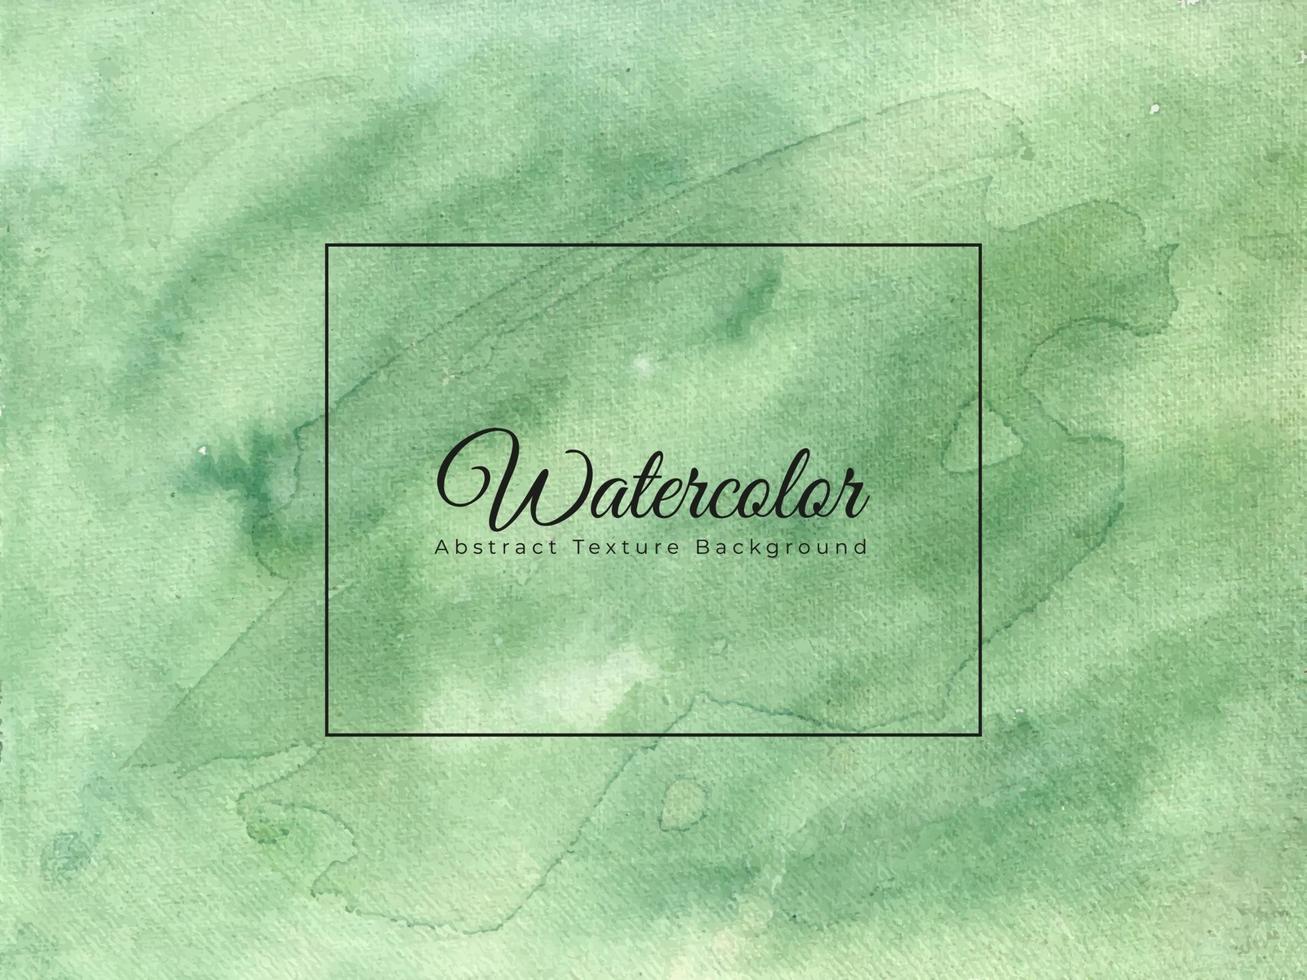 Watercolor abstract background in green color vector